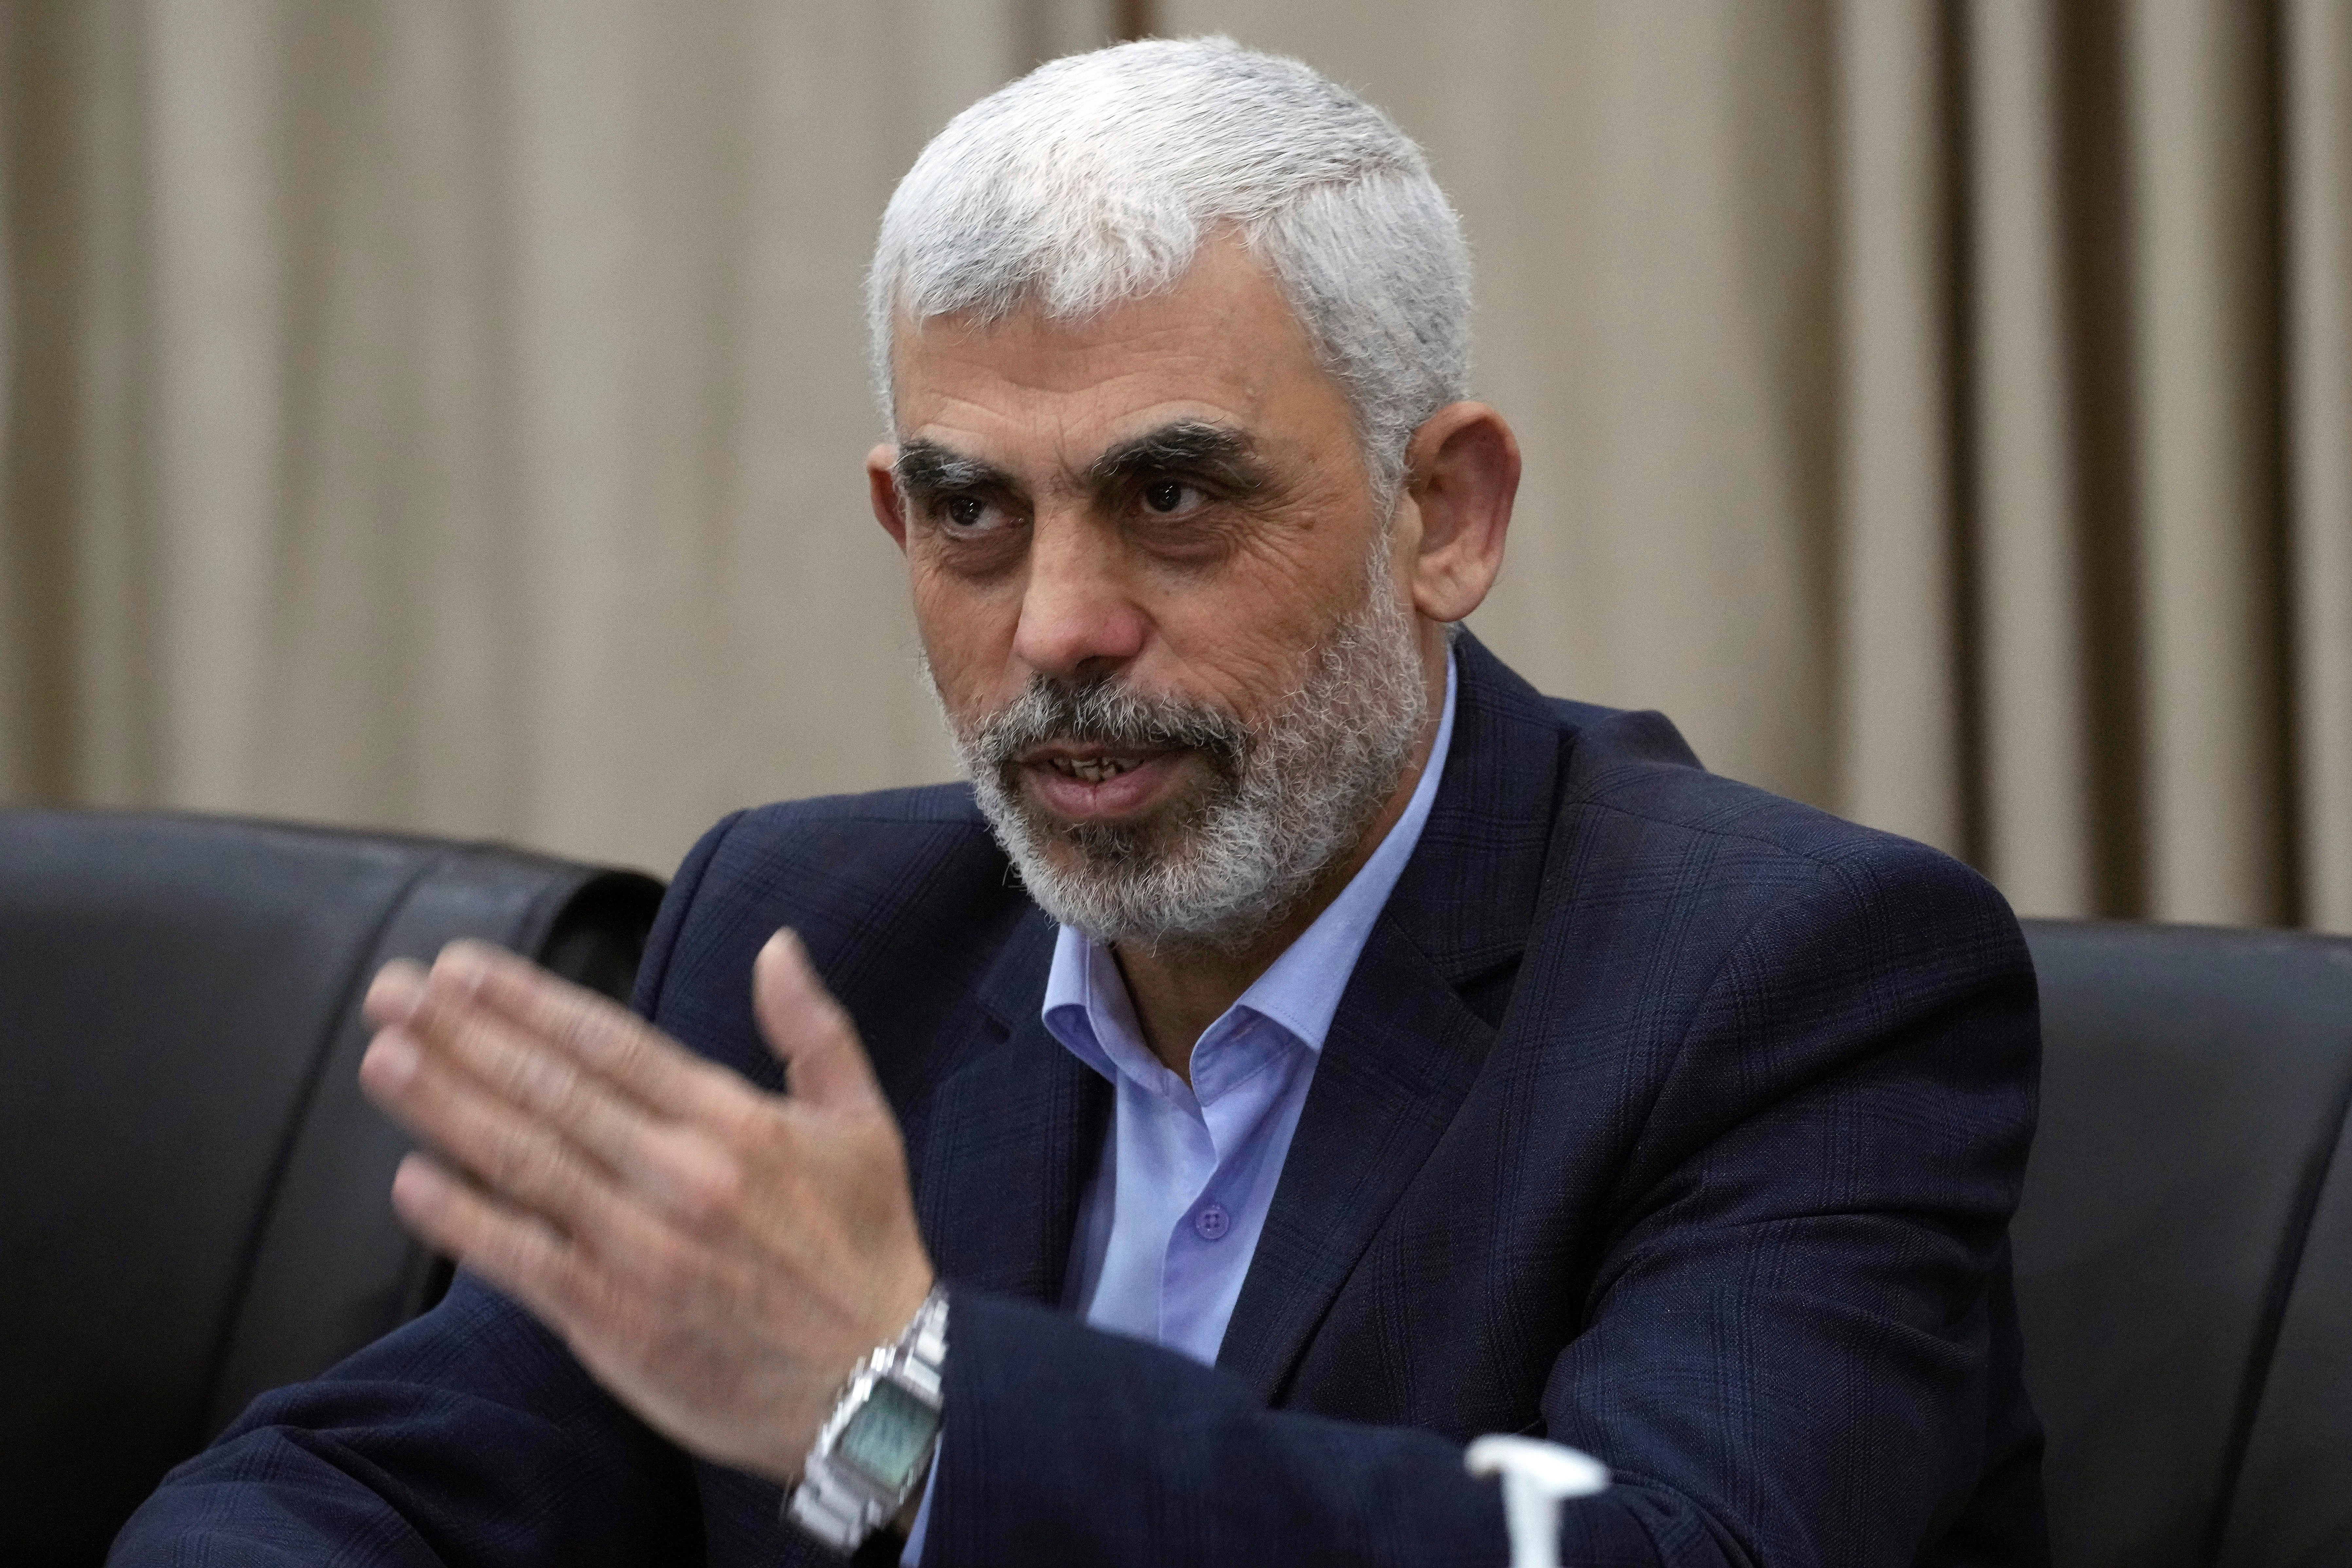 An arrest warrant for Hamas leader Yahya Sinwar was also called for by the ICC